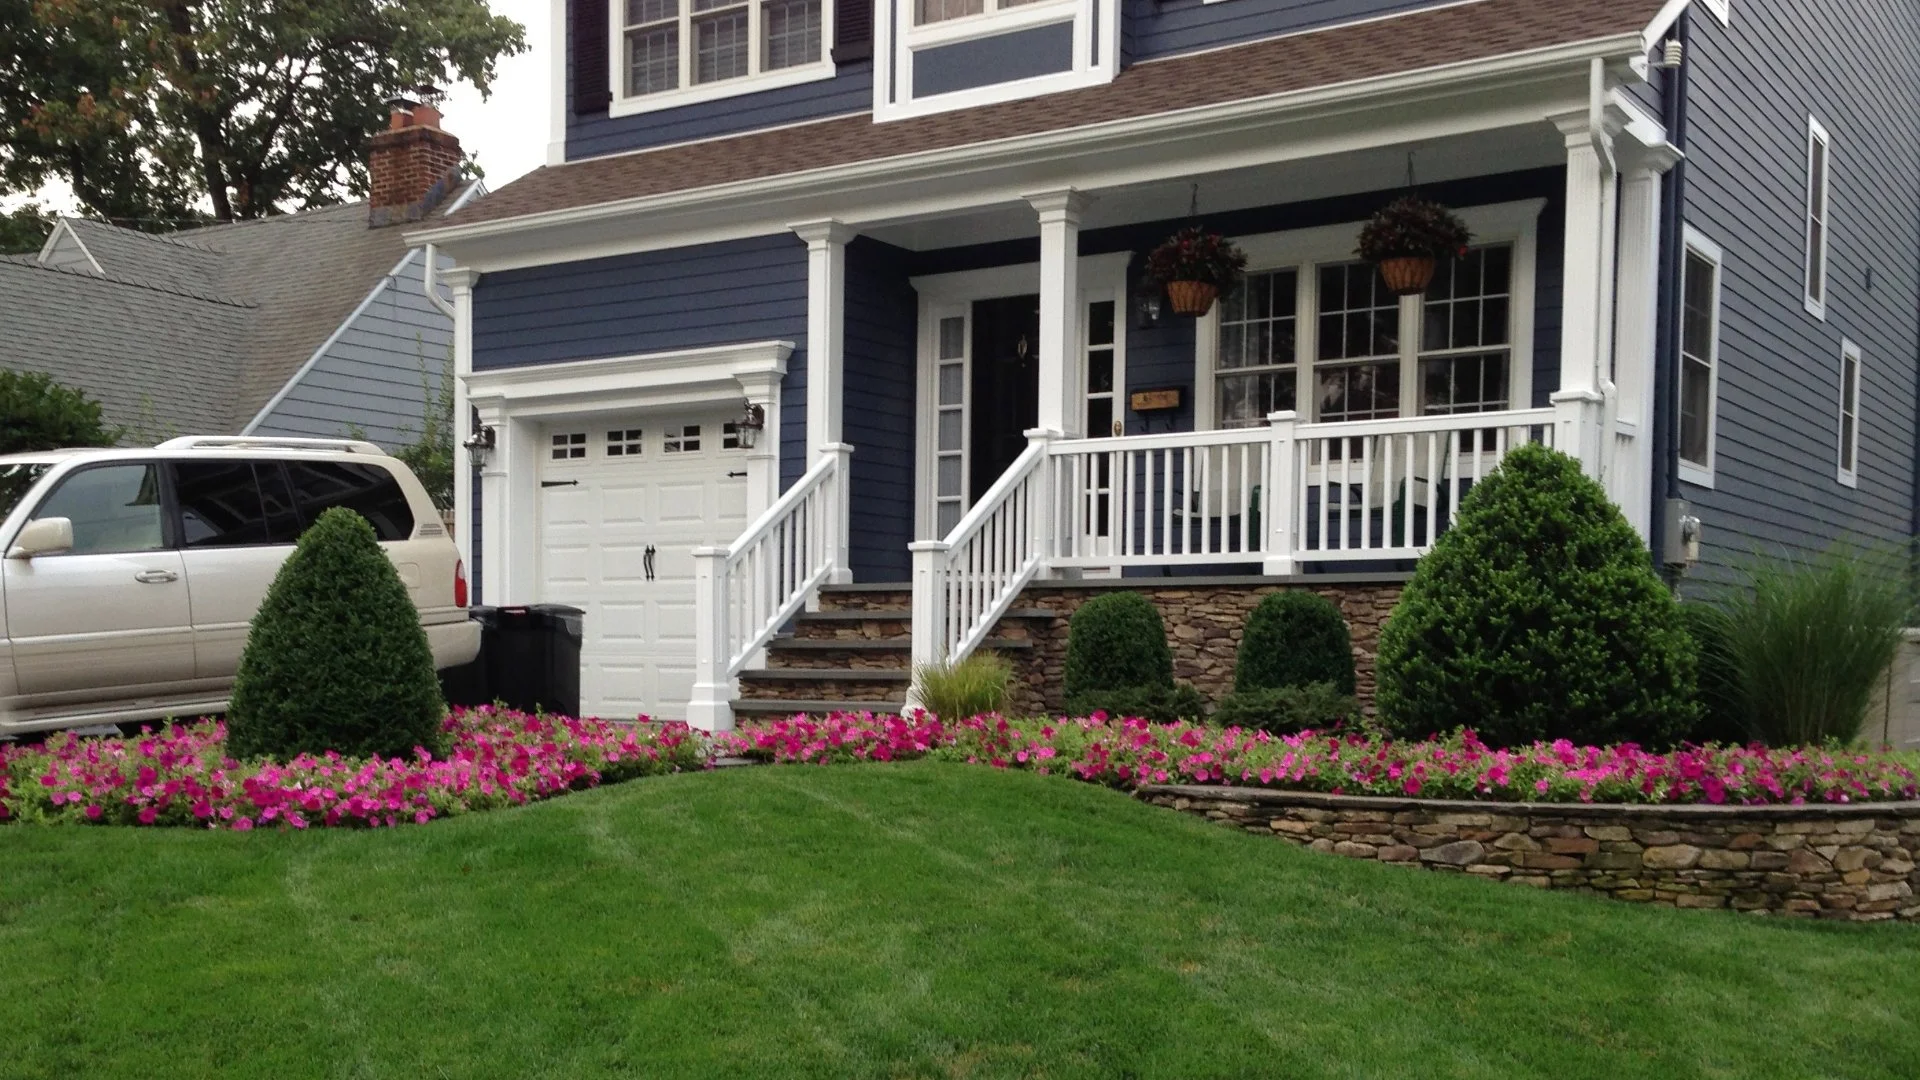 It's Time to Spruce up Your Landscape This Fall With These 4 Maintenance Tasks